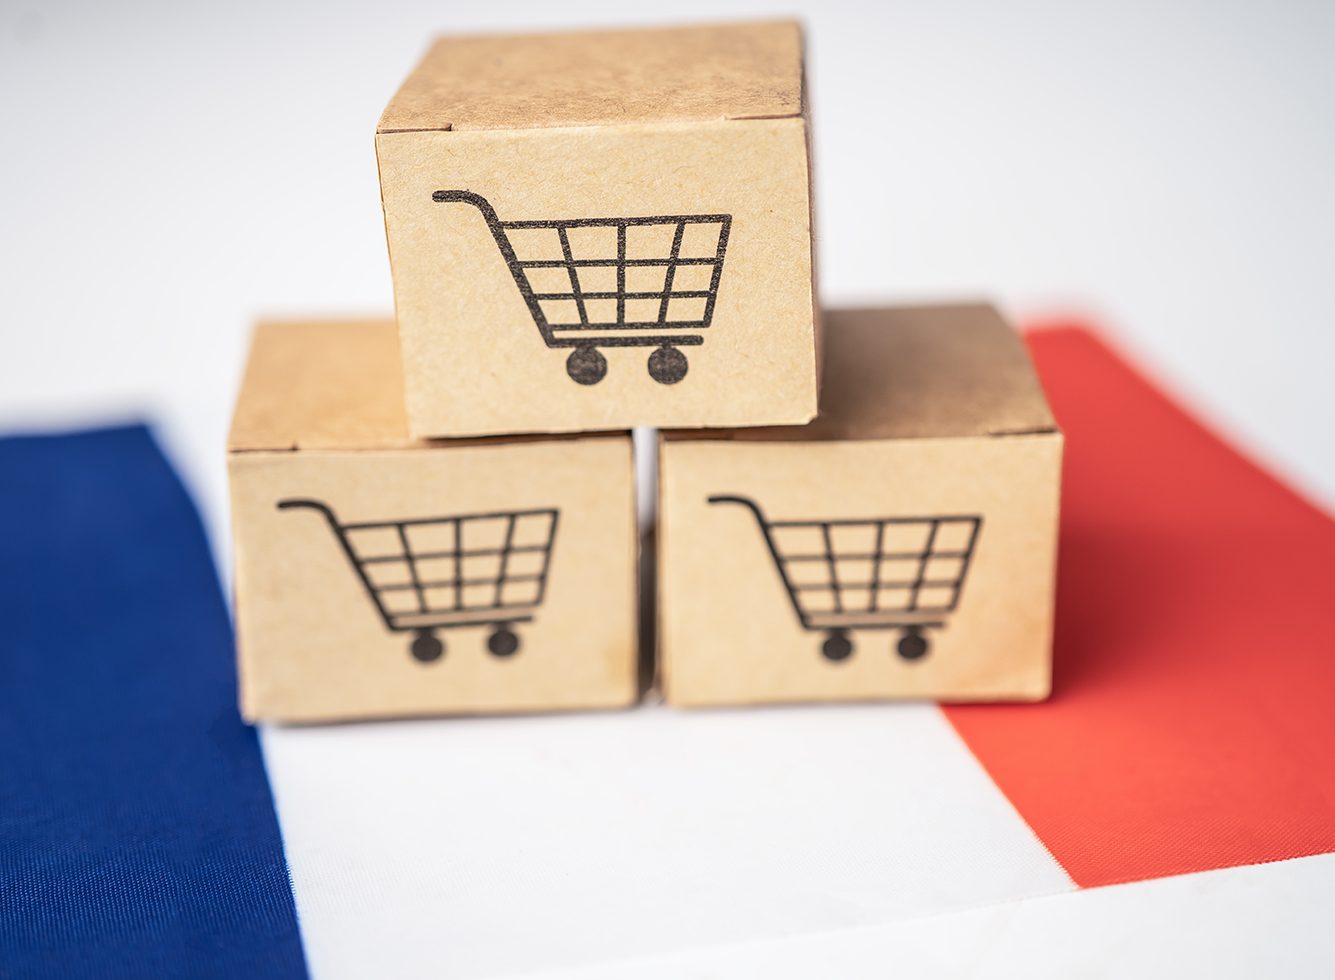 Discovering the Top French Online Marketplaces